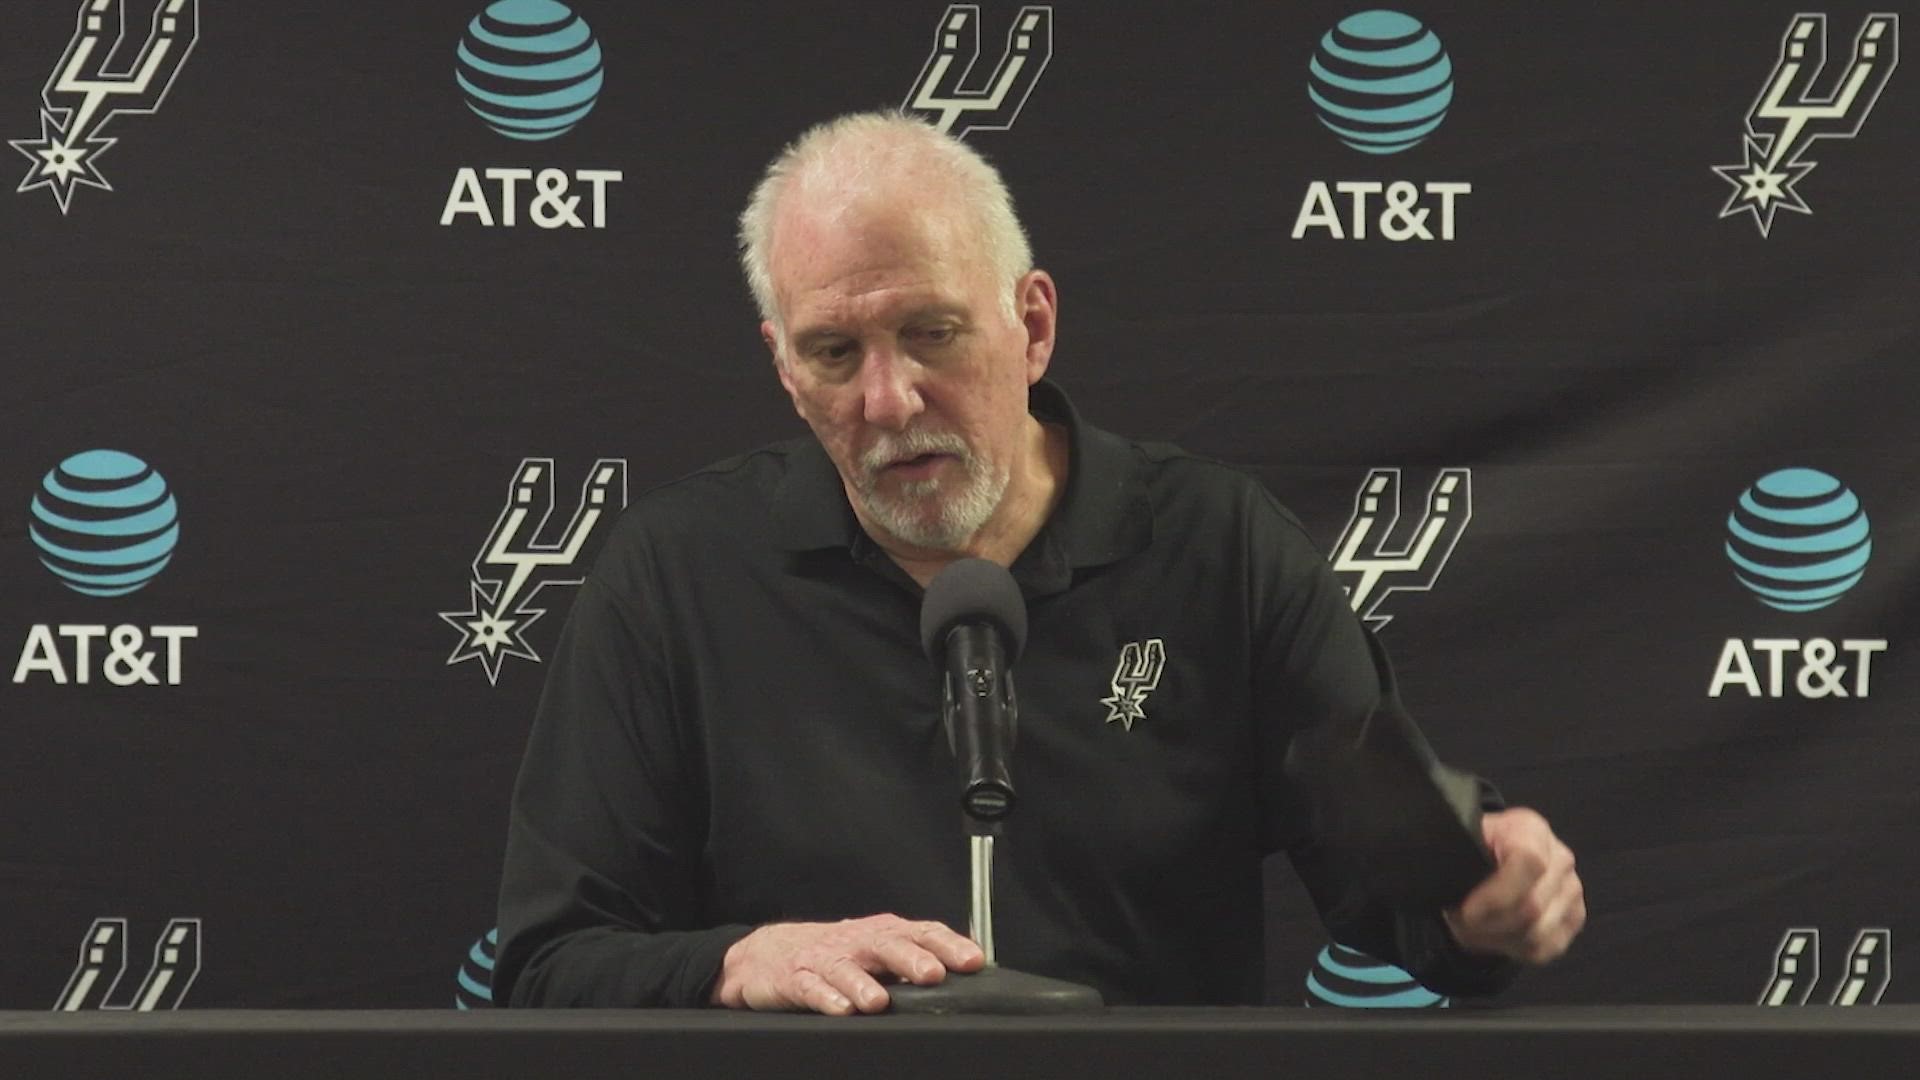 "A lot of guys got to participate, but obviously it wasn’t a fair fight,” Popovich said.